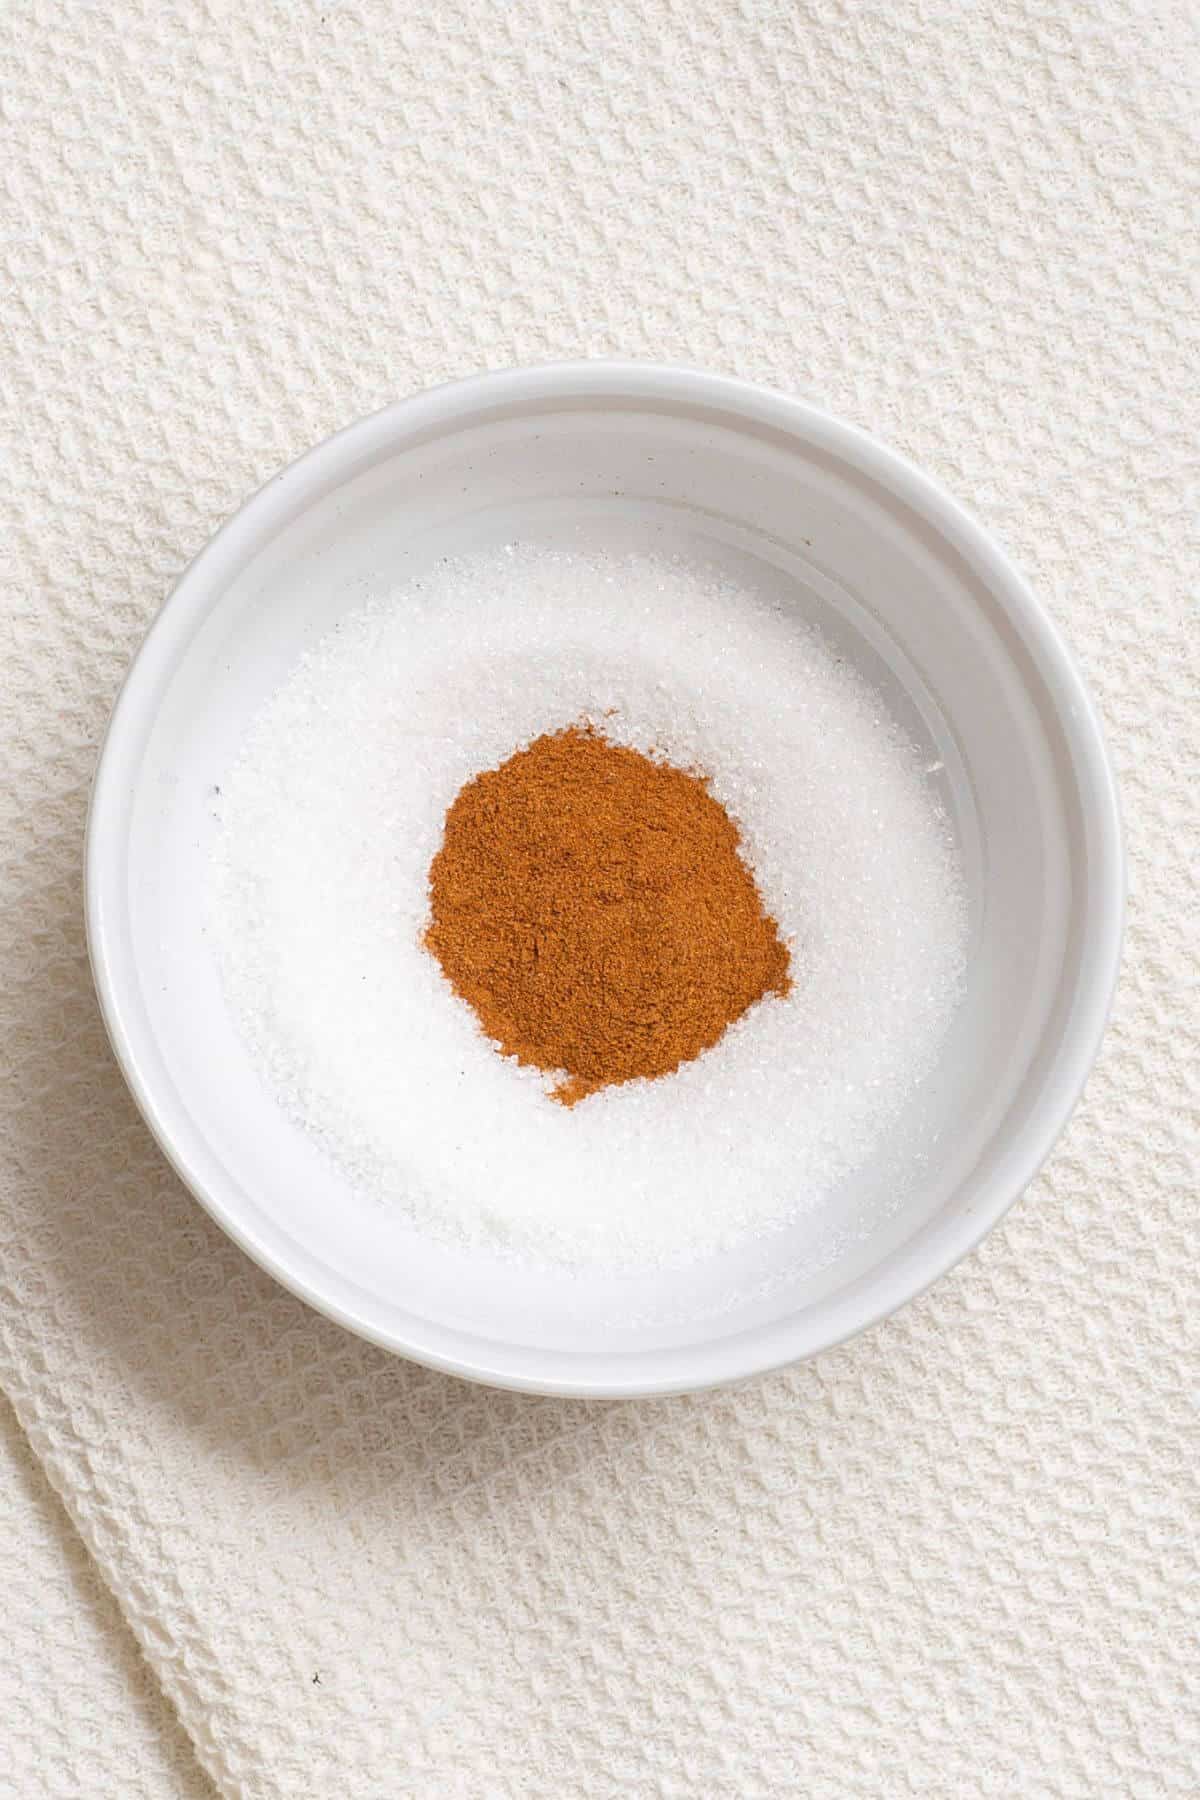 Sugar and cinnamon in a mixing bowl.